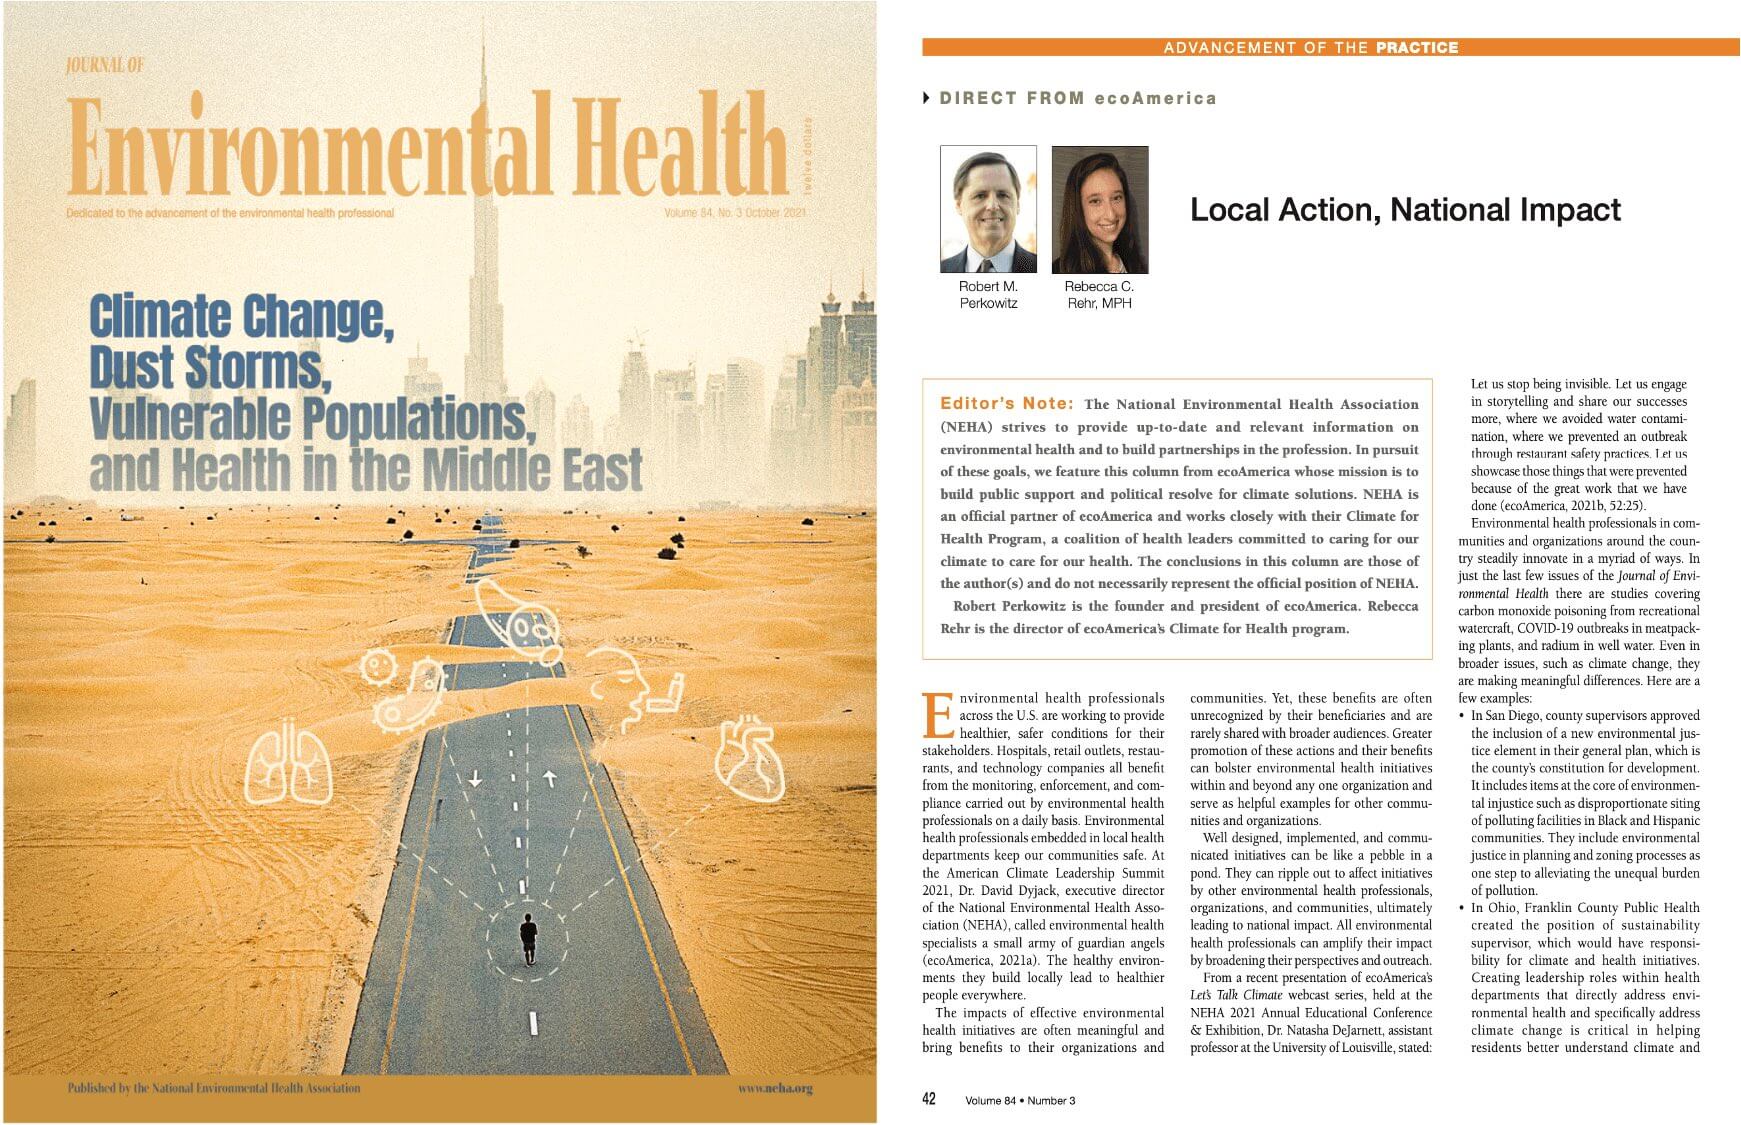 New piece in the Journal of Environmental Health, “Local Action, National Impact”